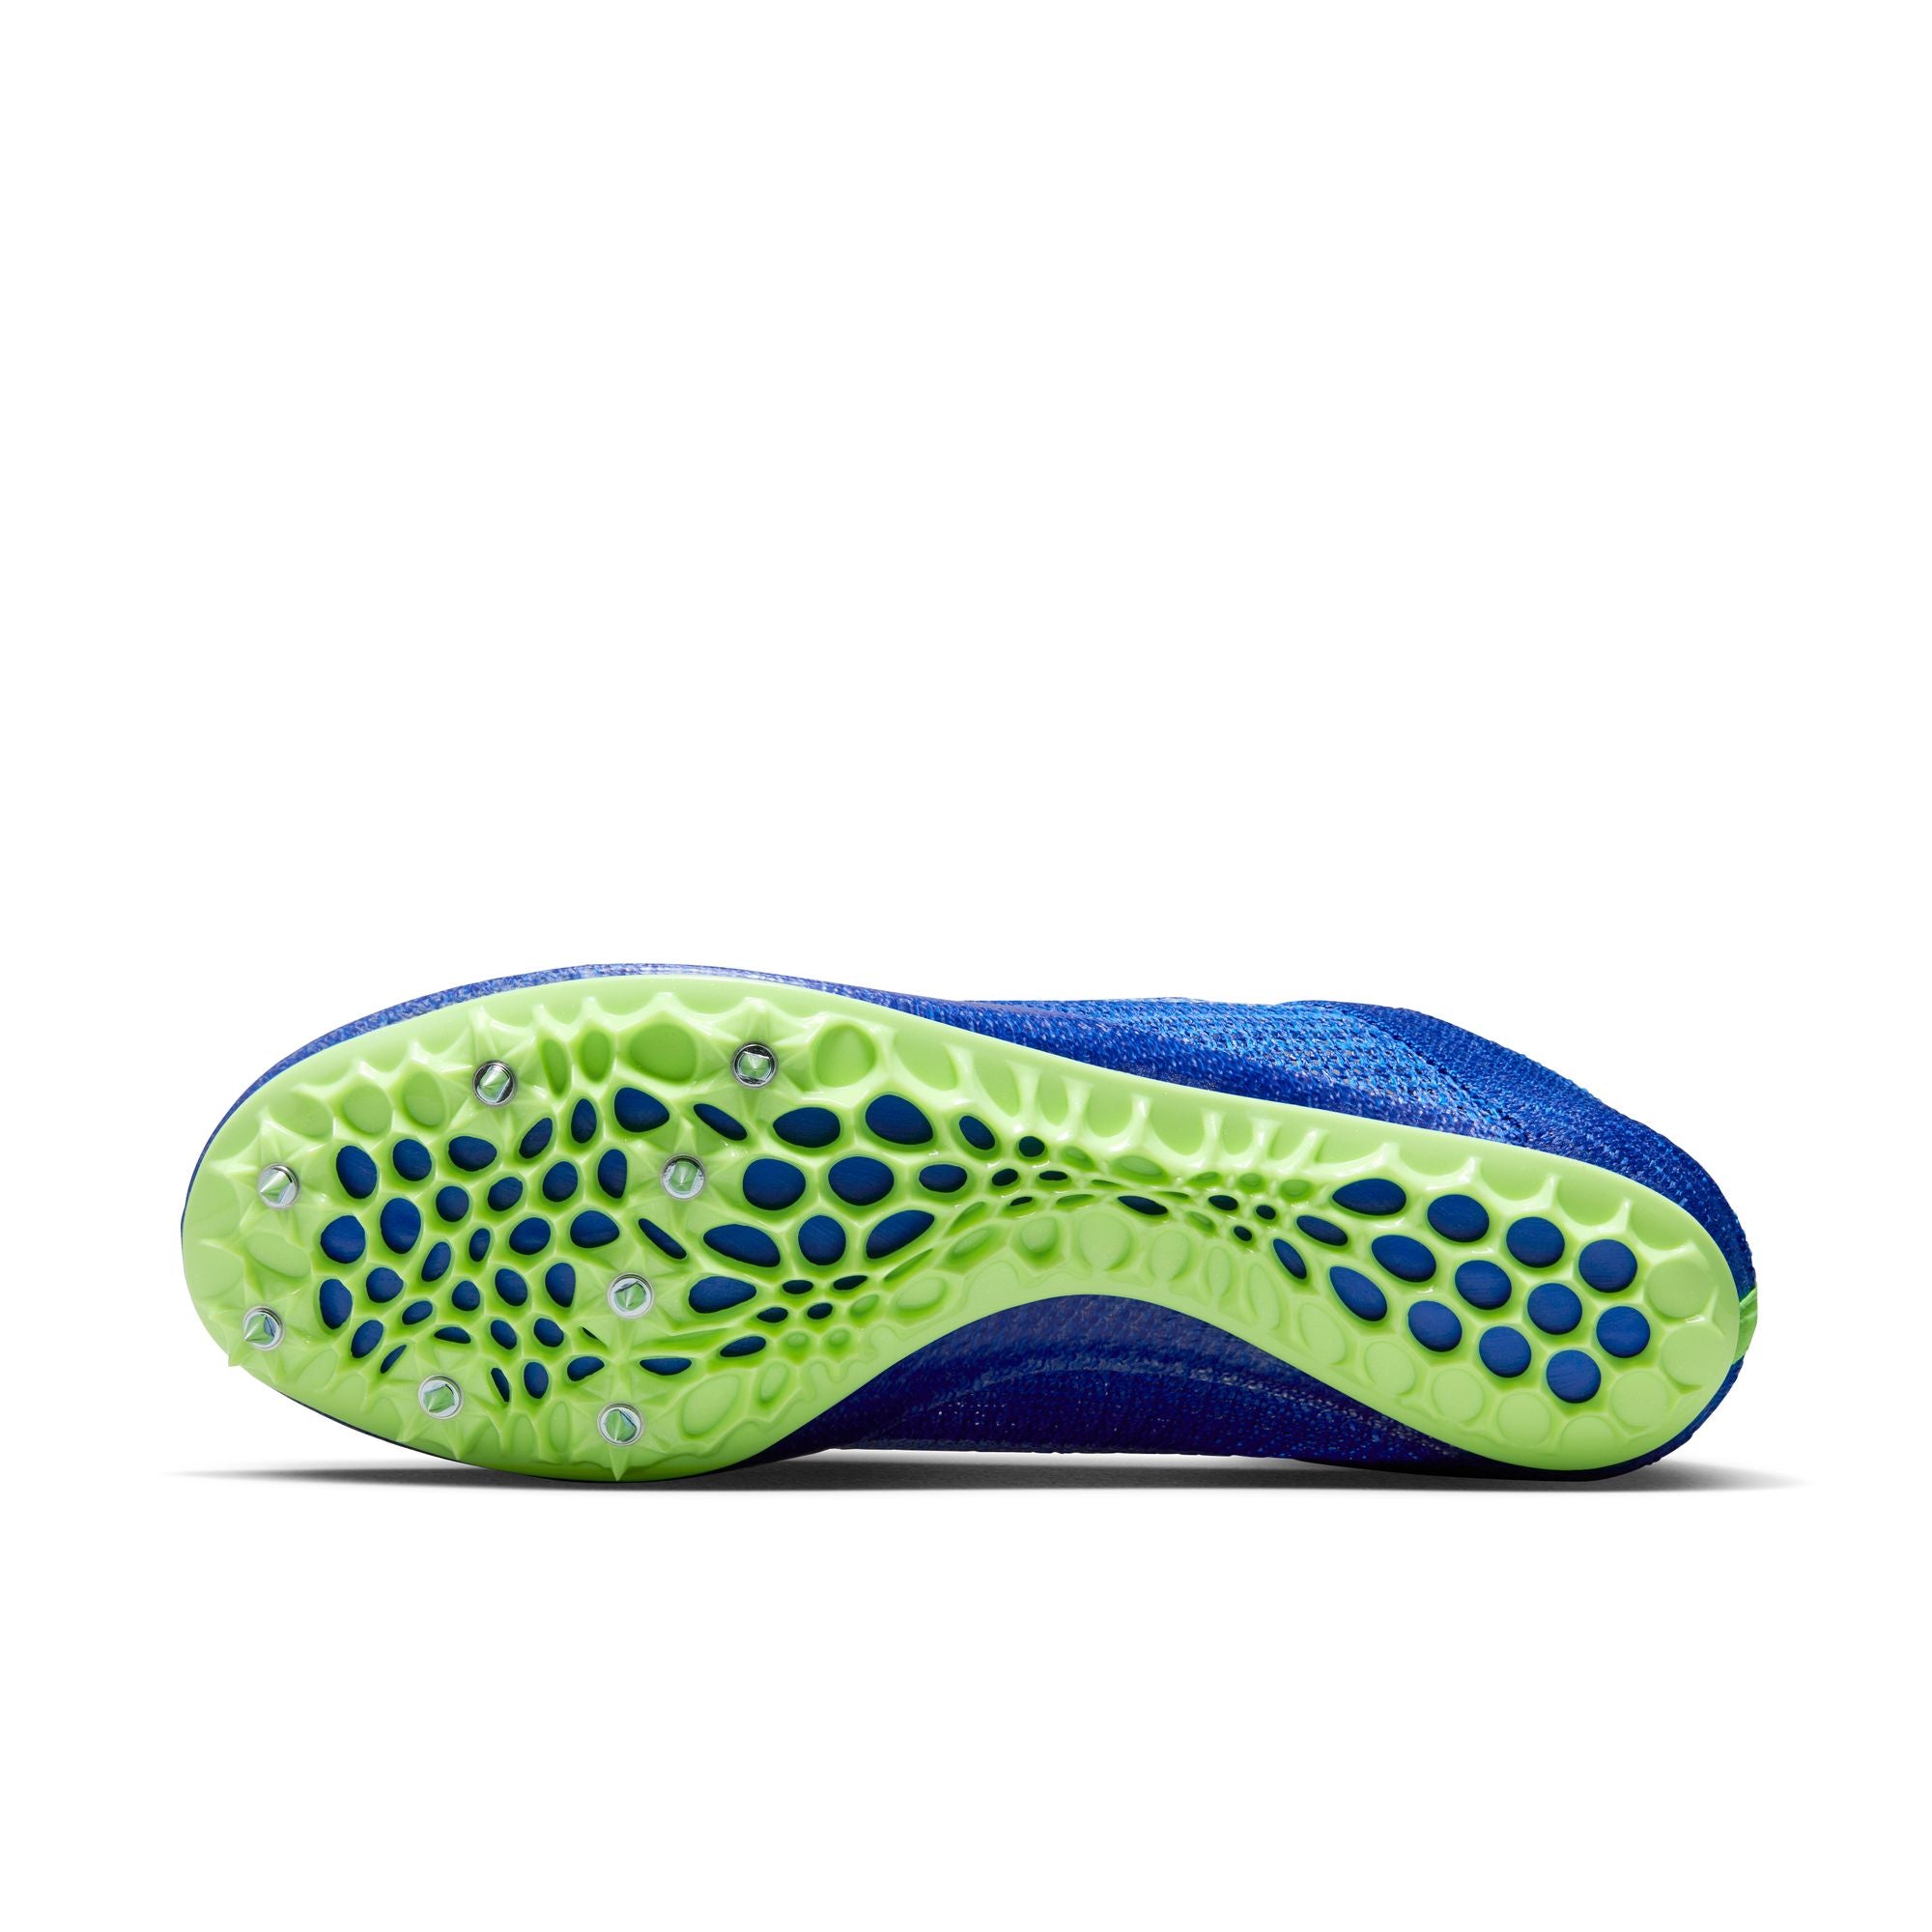 ZOOM SUPERFLY ELITE 2 - 400 RACER BLUE/WHITE-LIME | Performance Running  Outfitters